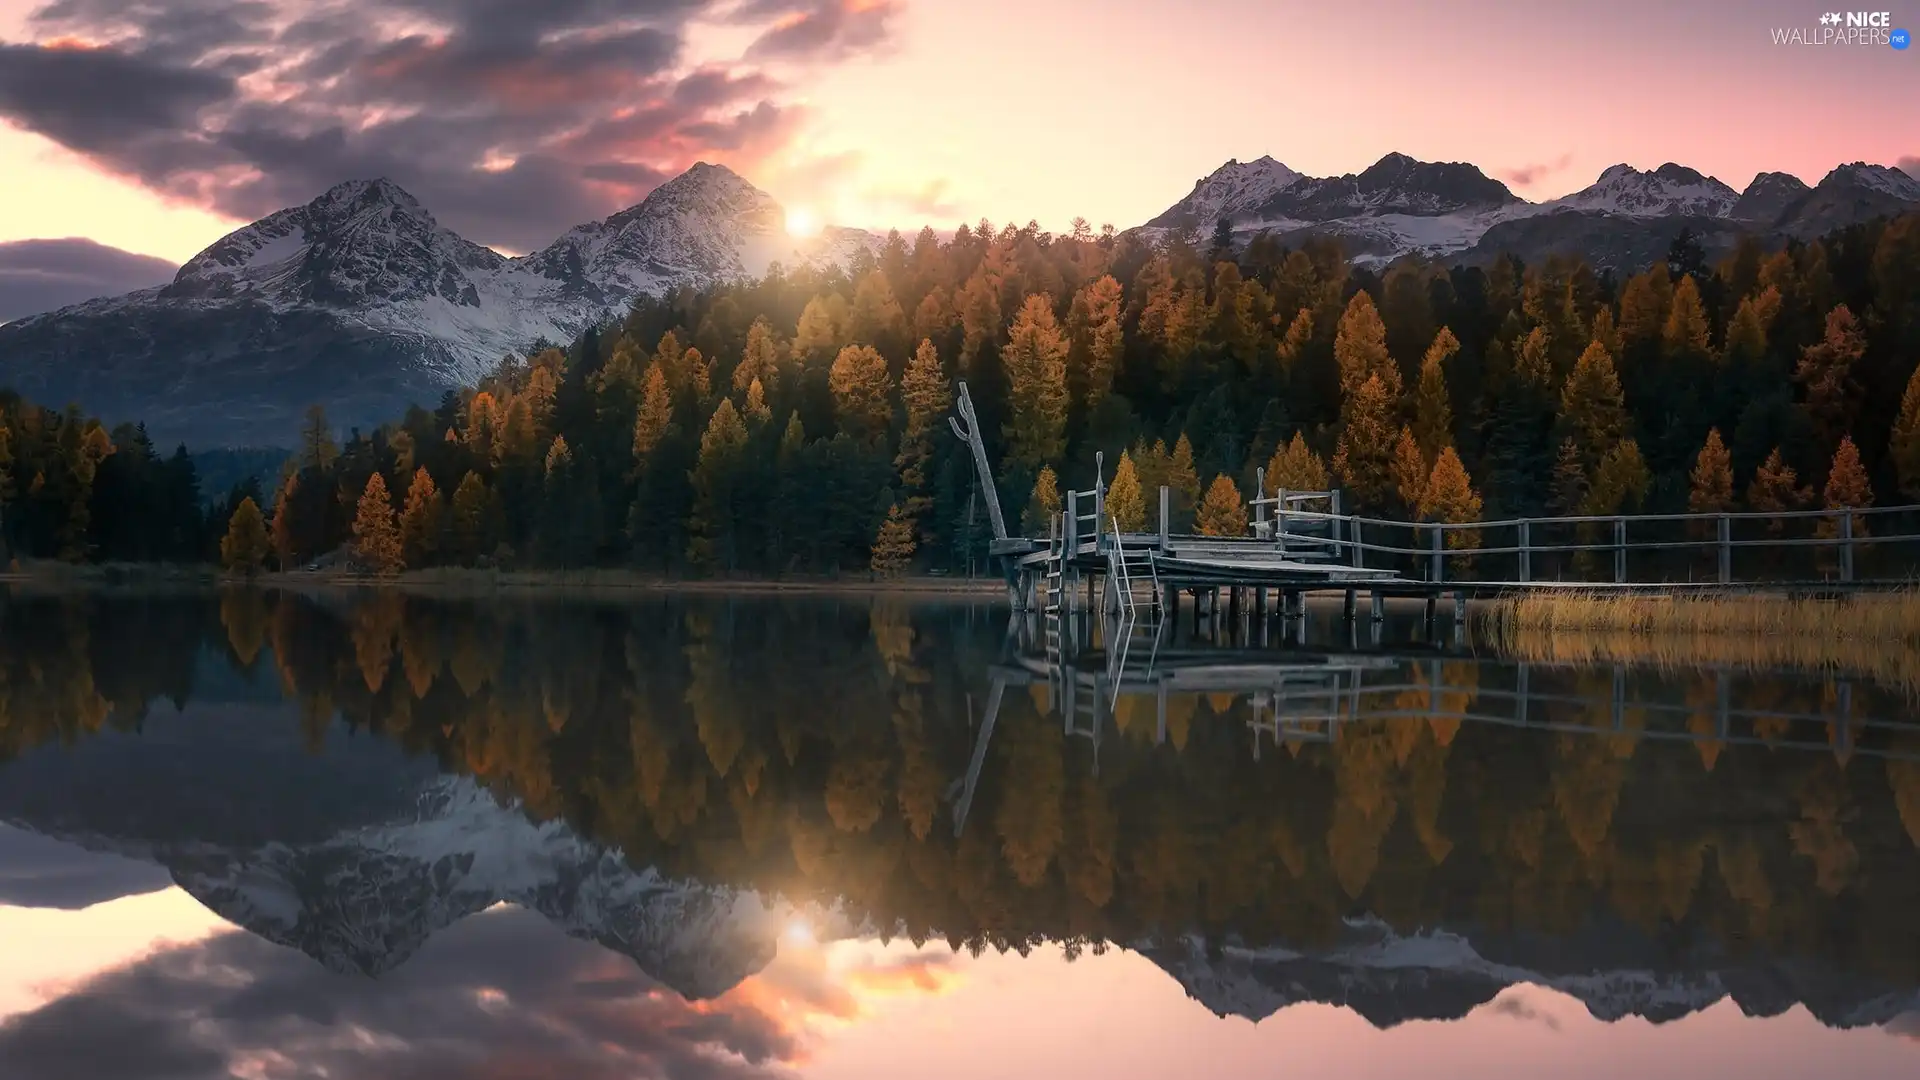 lake, Mountains, Platform, trees, clouds, Switzerland, forest, Great Sunsets, viewes